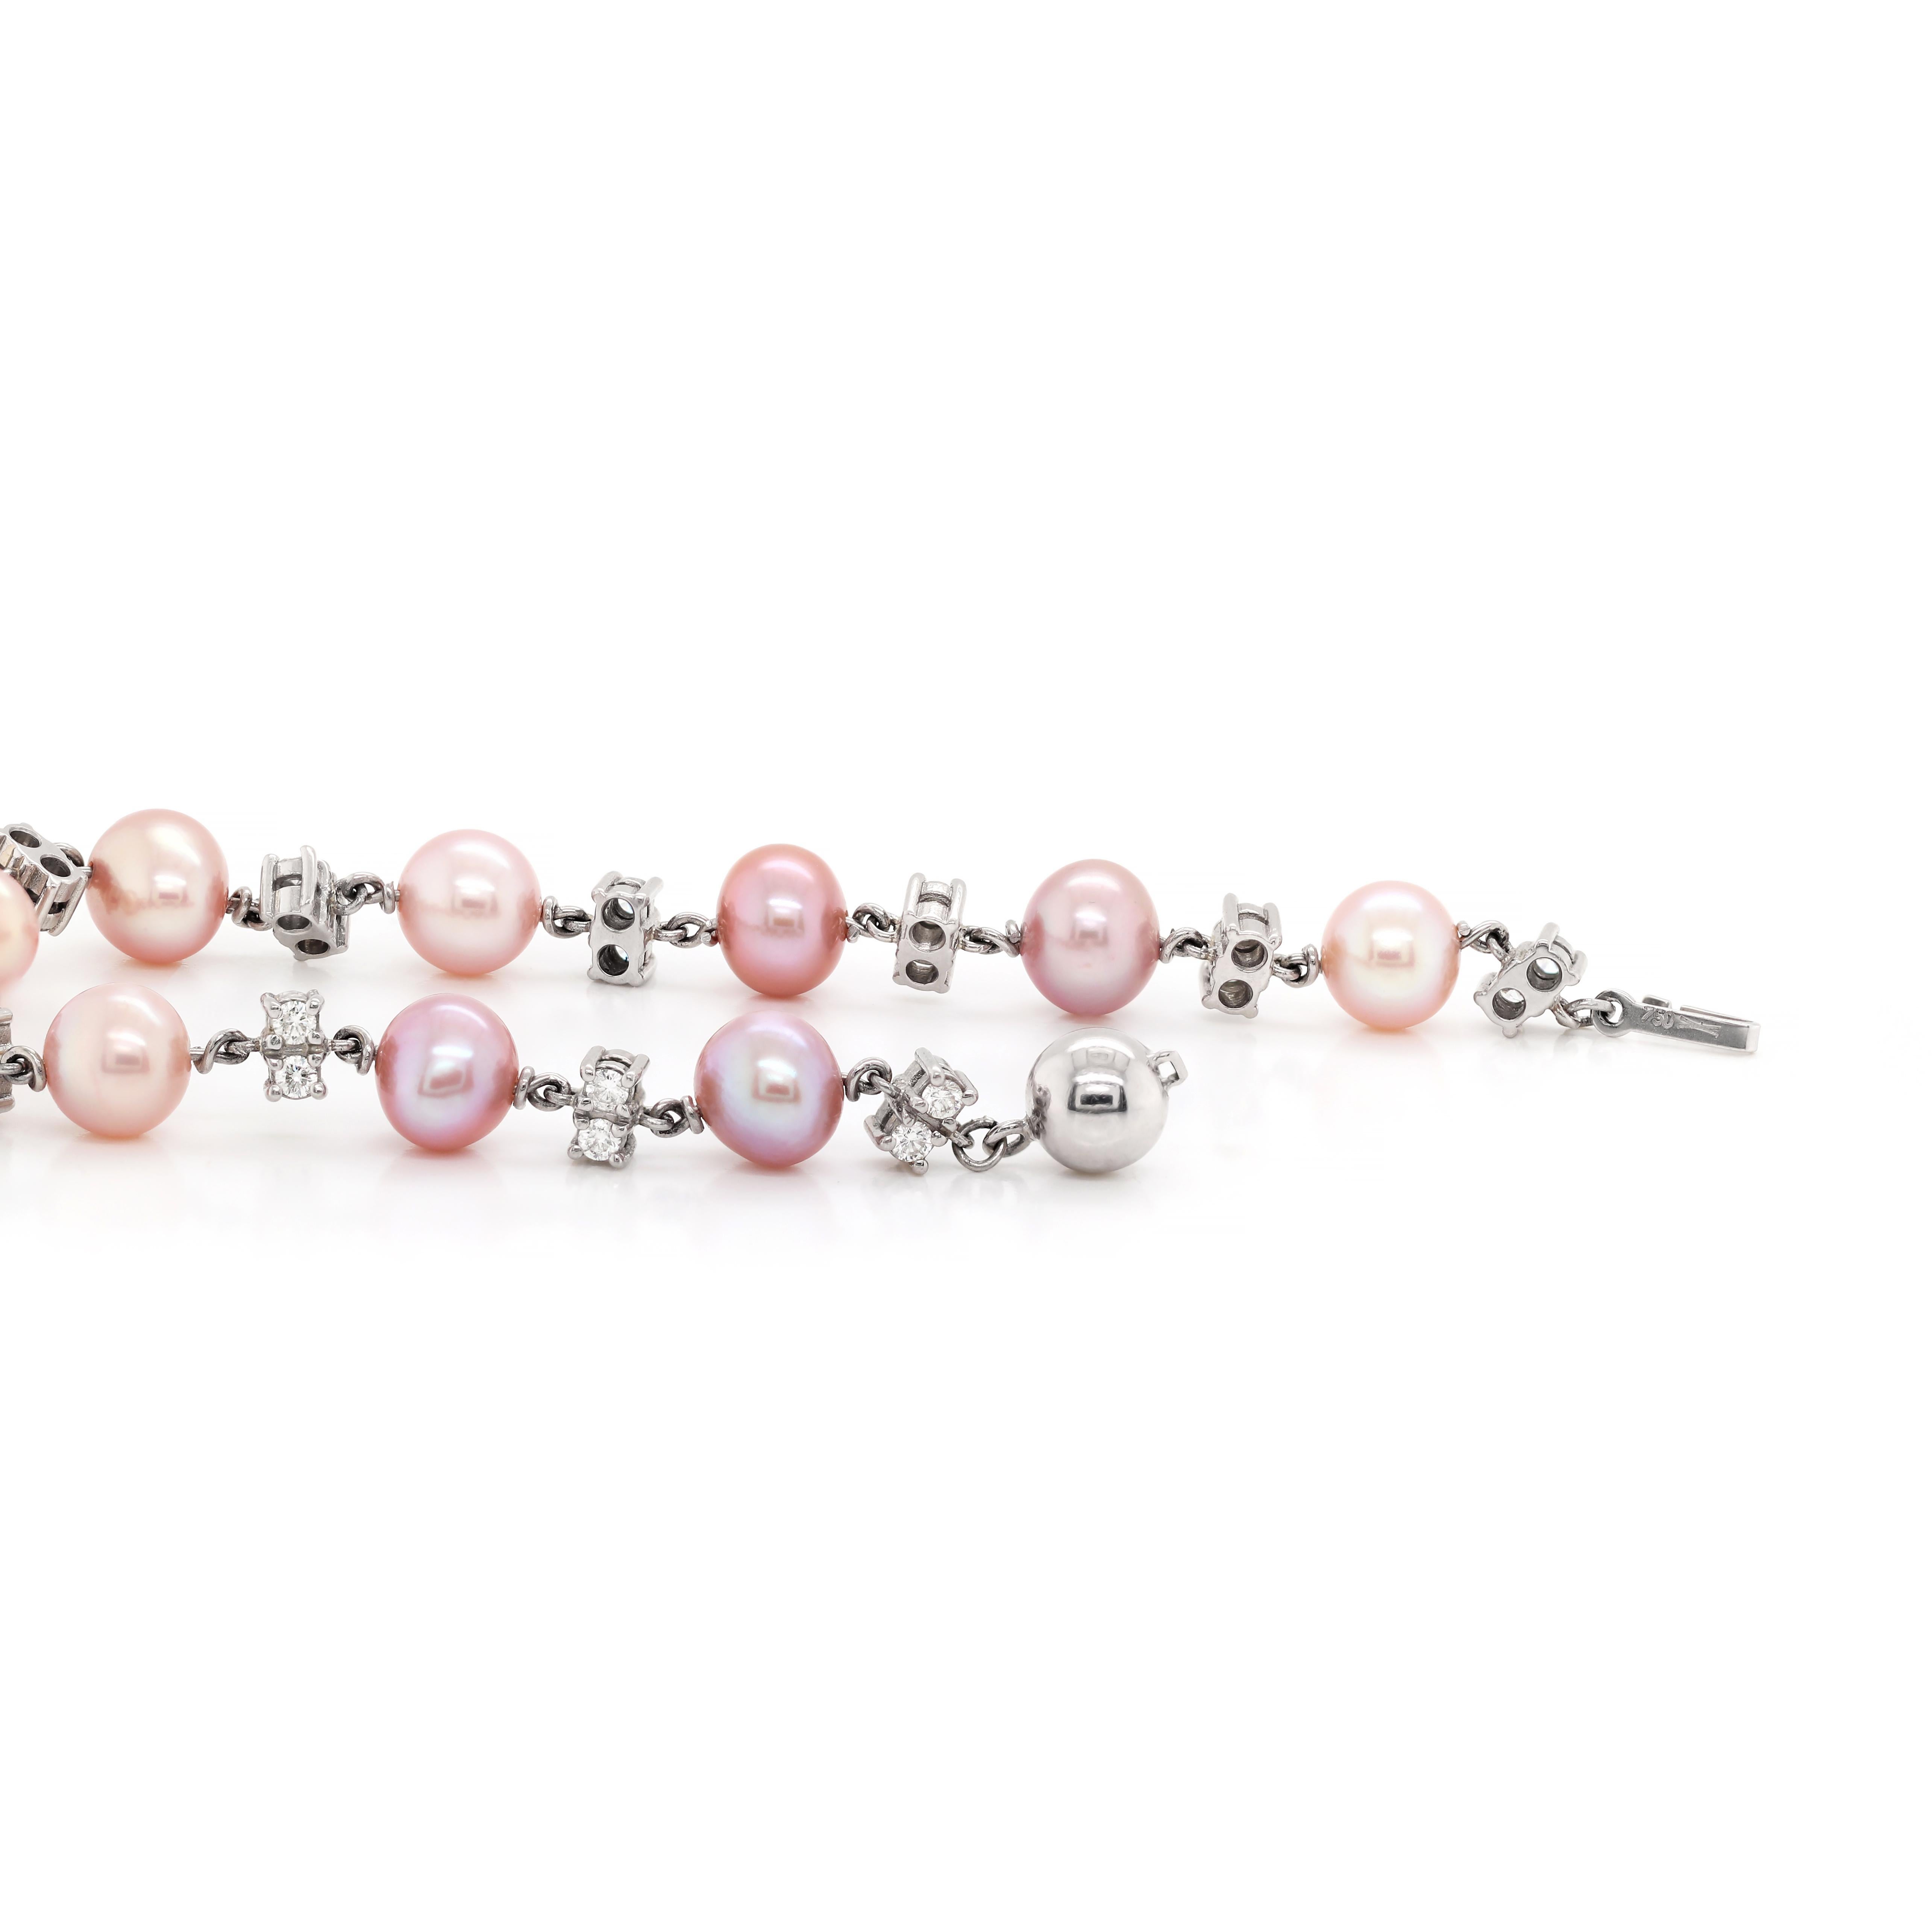 This elegant bracelet features ten round rosé coloured freshwater pearls, beautifully accompanied by 22 round brilliant cut diamonds, two in between each pearl, mounted in four claw open back settings.The total diamond weight in the bracelet comes